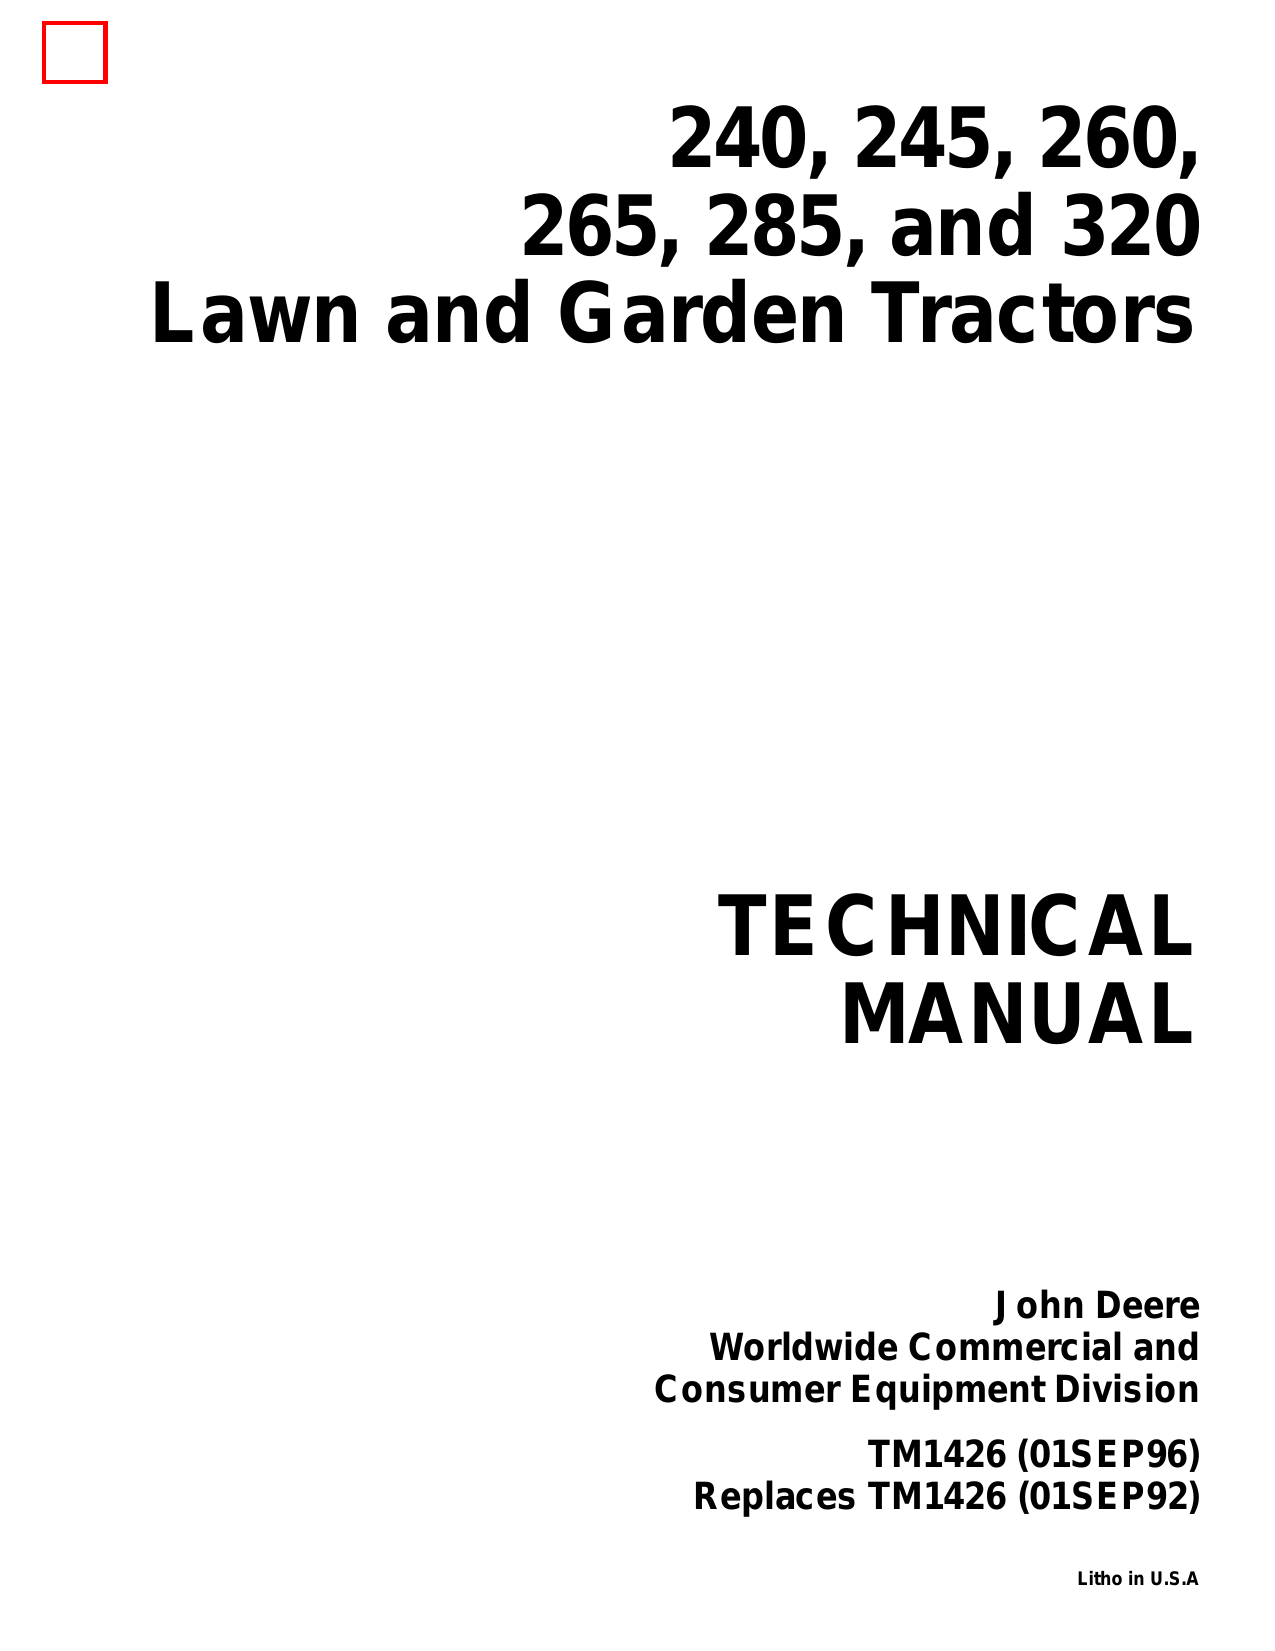 John Deere 240, 245, 260, 265, 285, 320 lawn and garden tractor technical manual Preview image 6